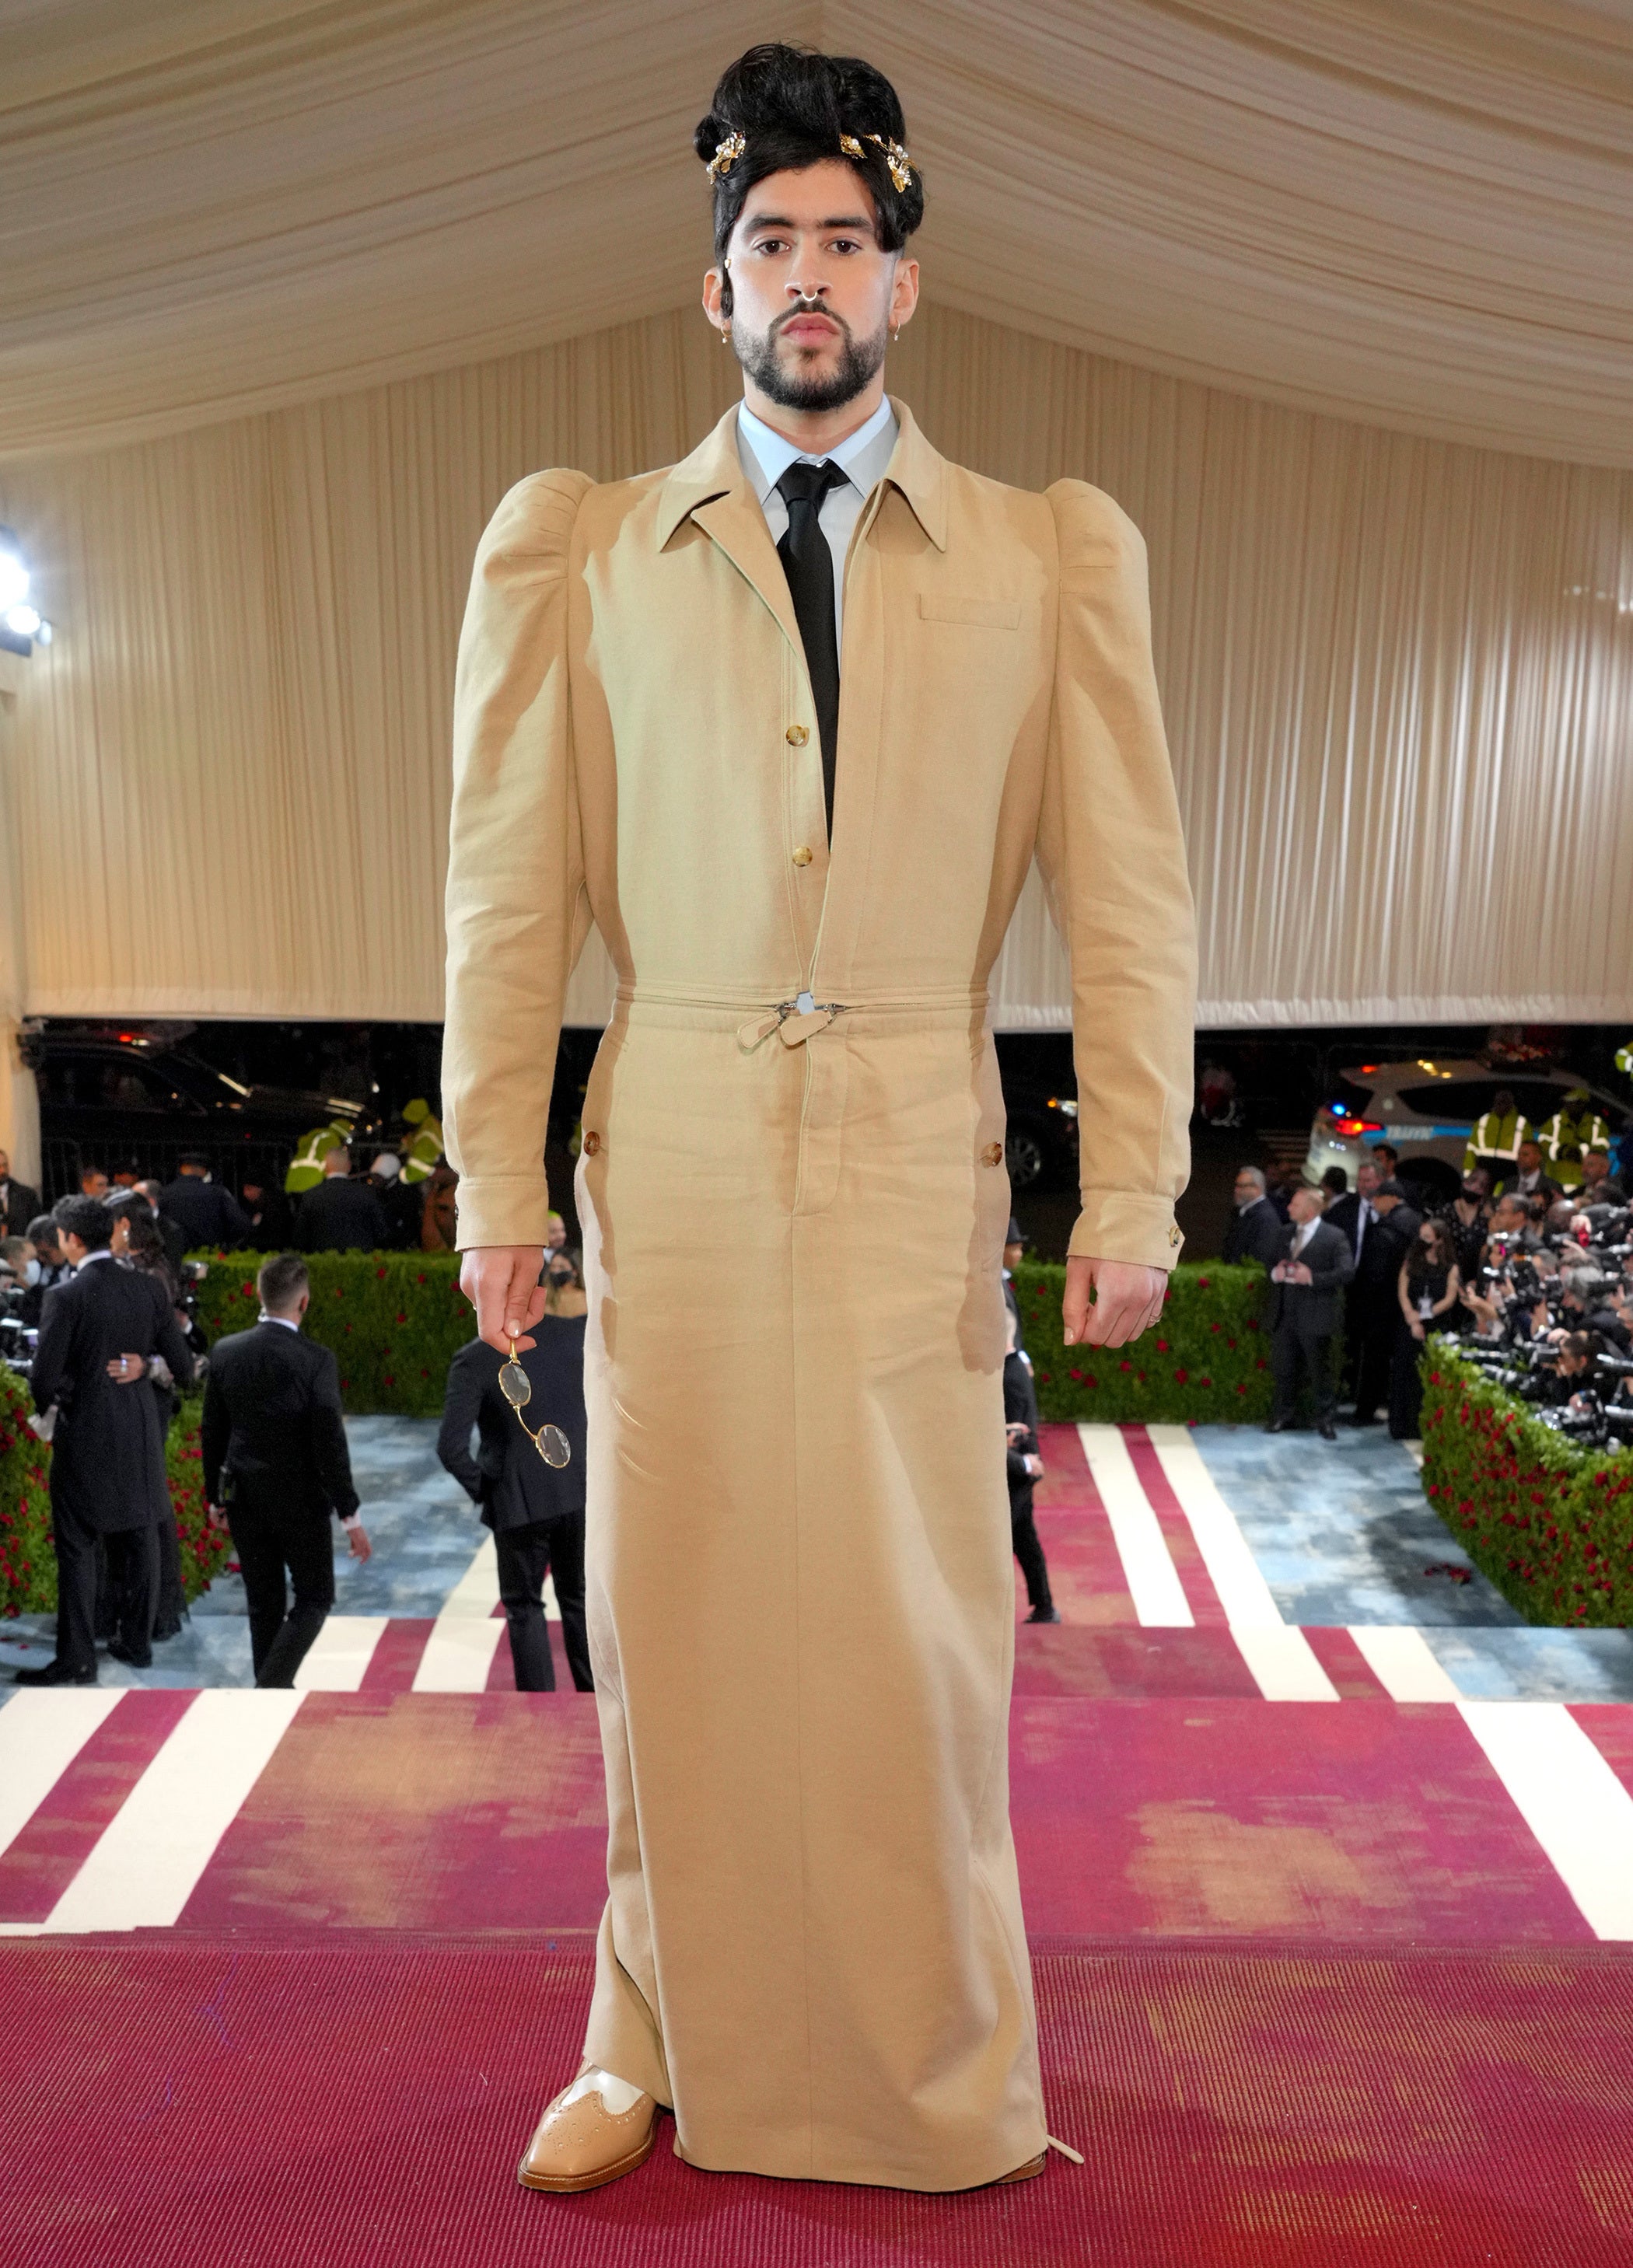 Innovative Fashion From The Men of the Met Gala